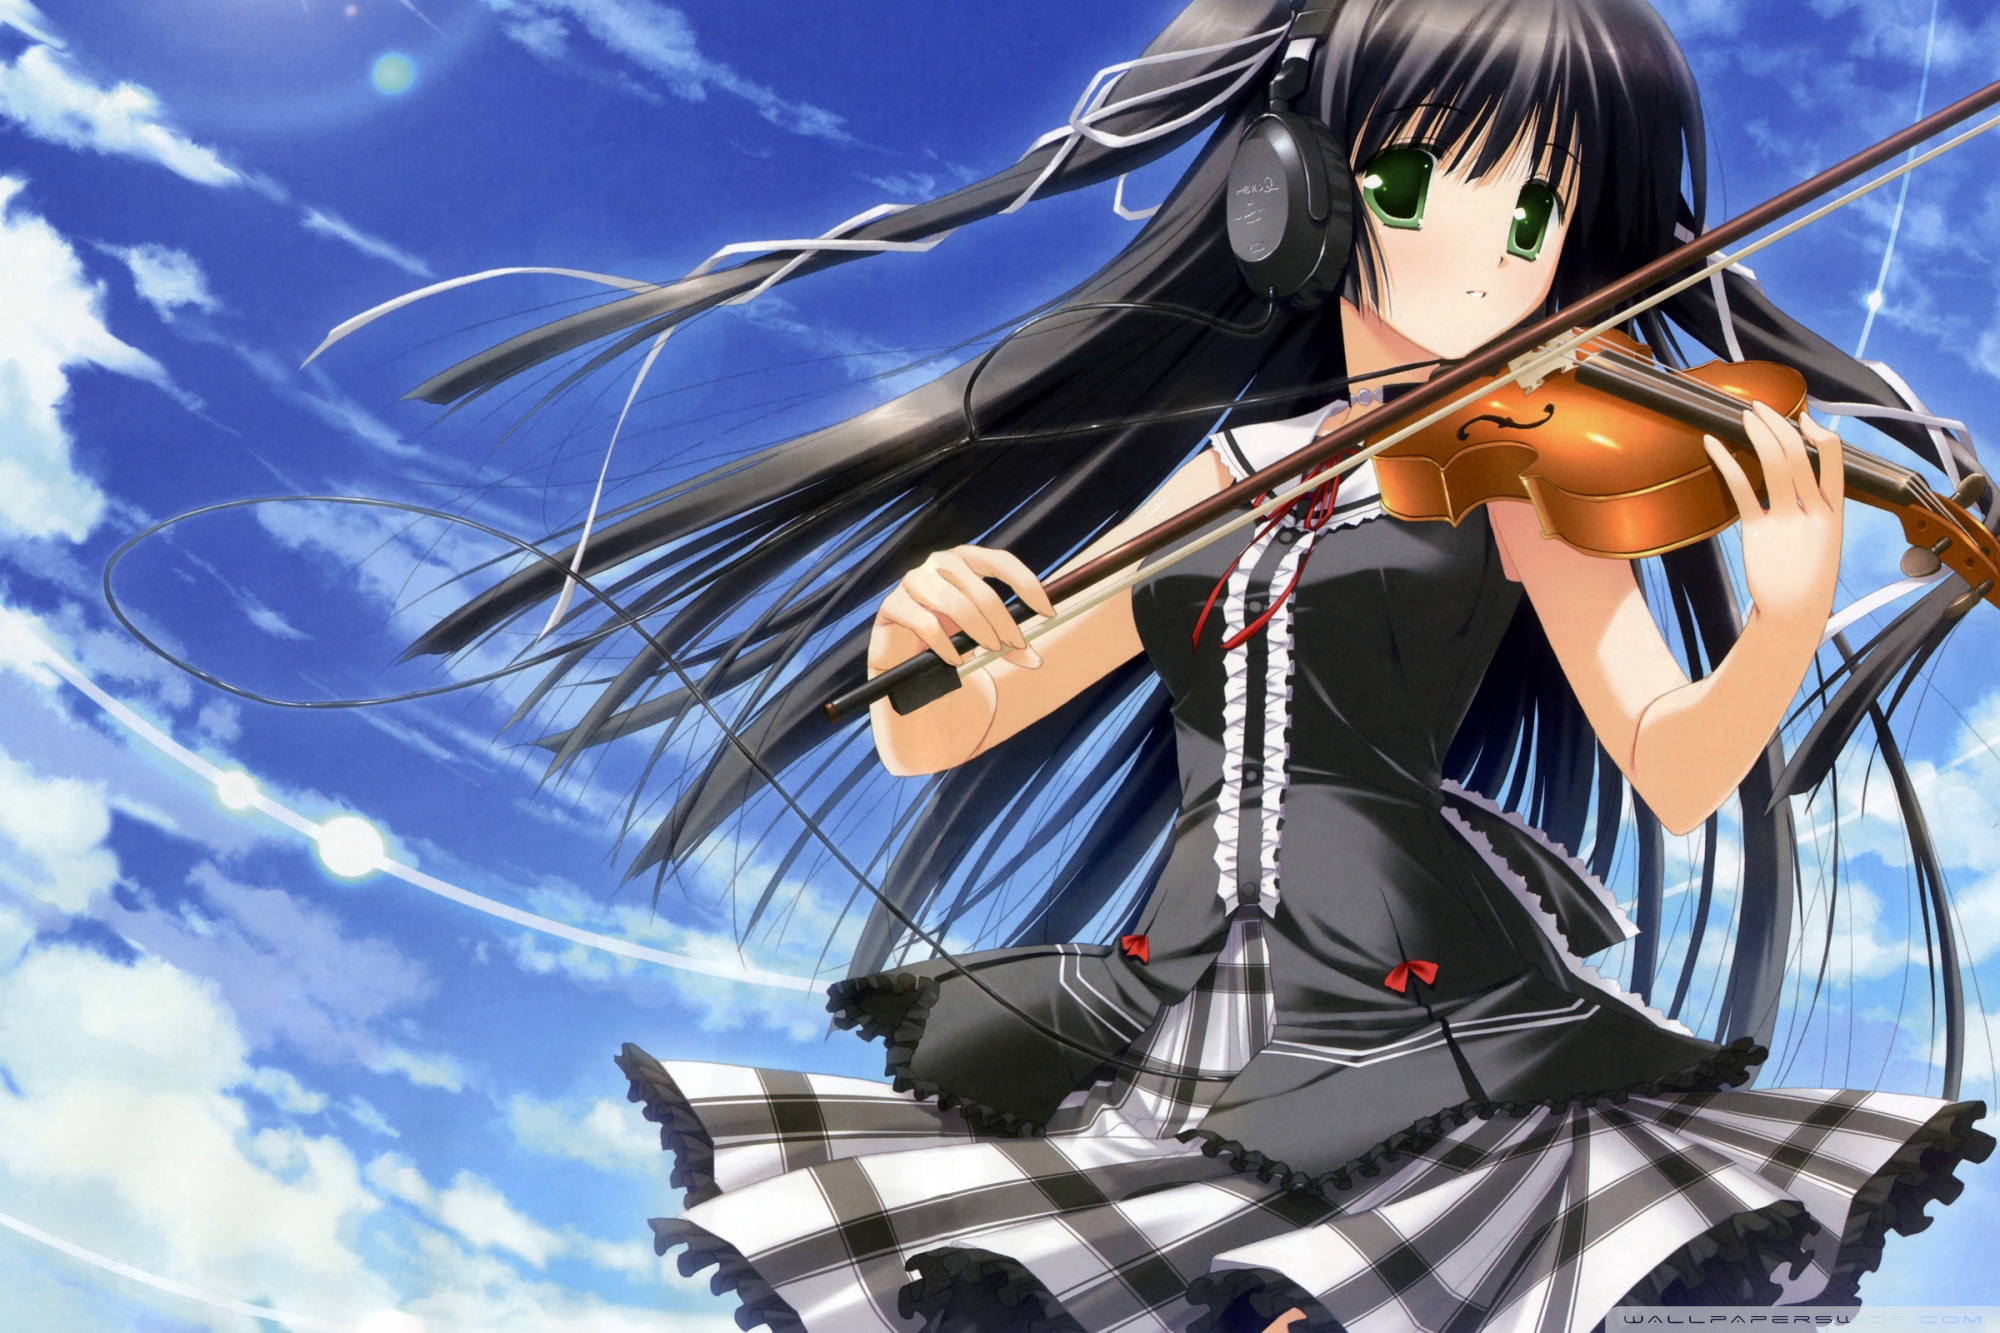 Tablet - Anime Girl With Violin , HD Wallpaper & Backgrounds